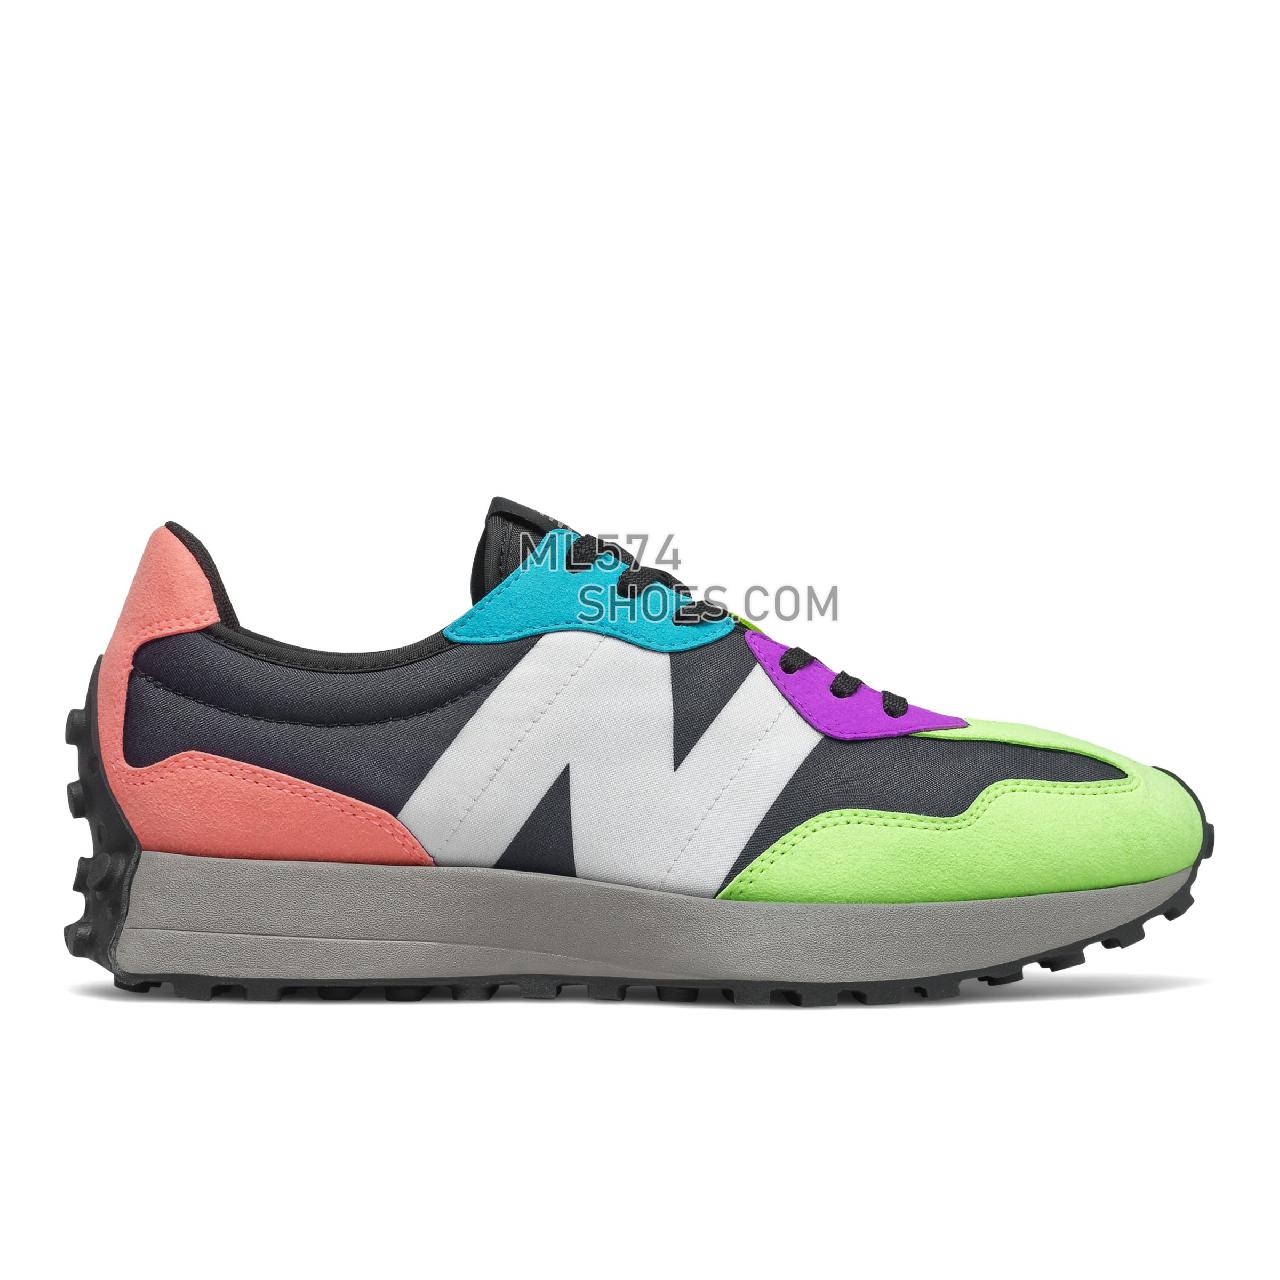 New Balance 327 - Men's Sport Style Sneakers - Paradise Pink with Black - MS327EA